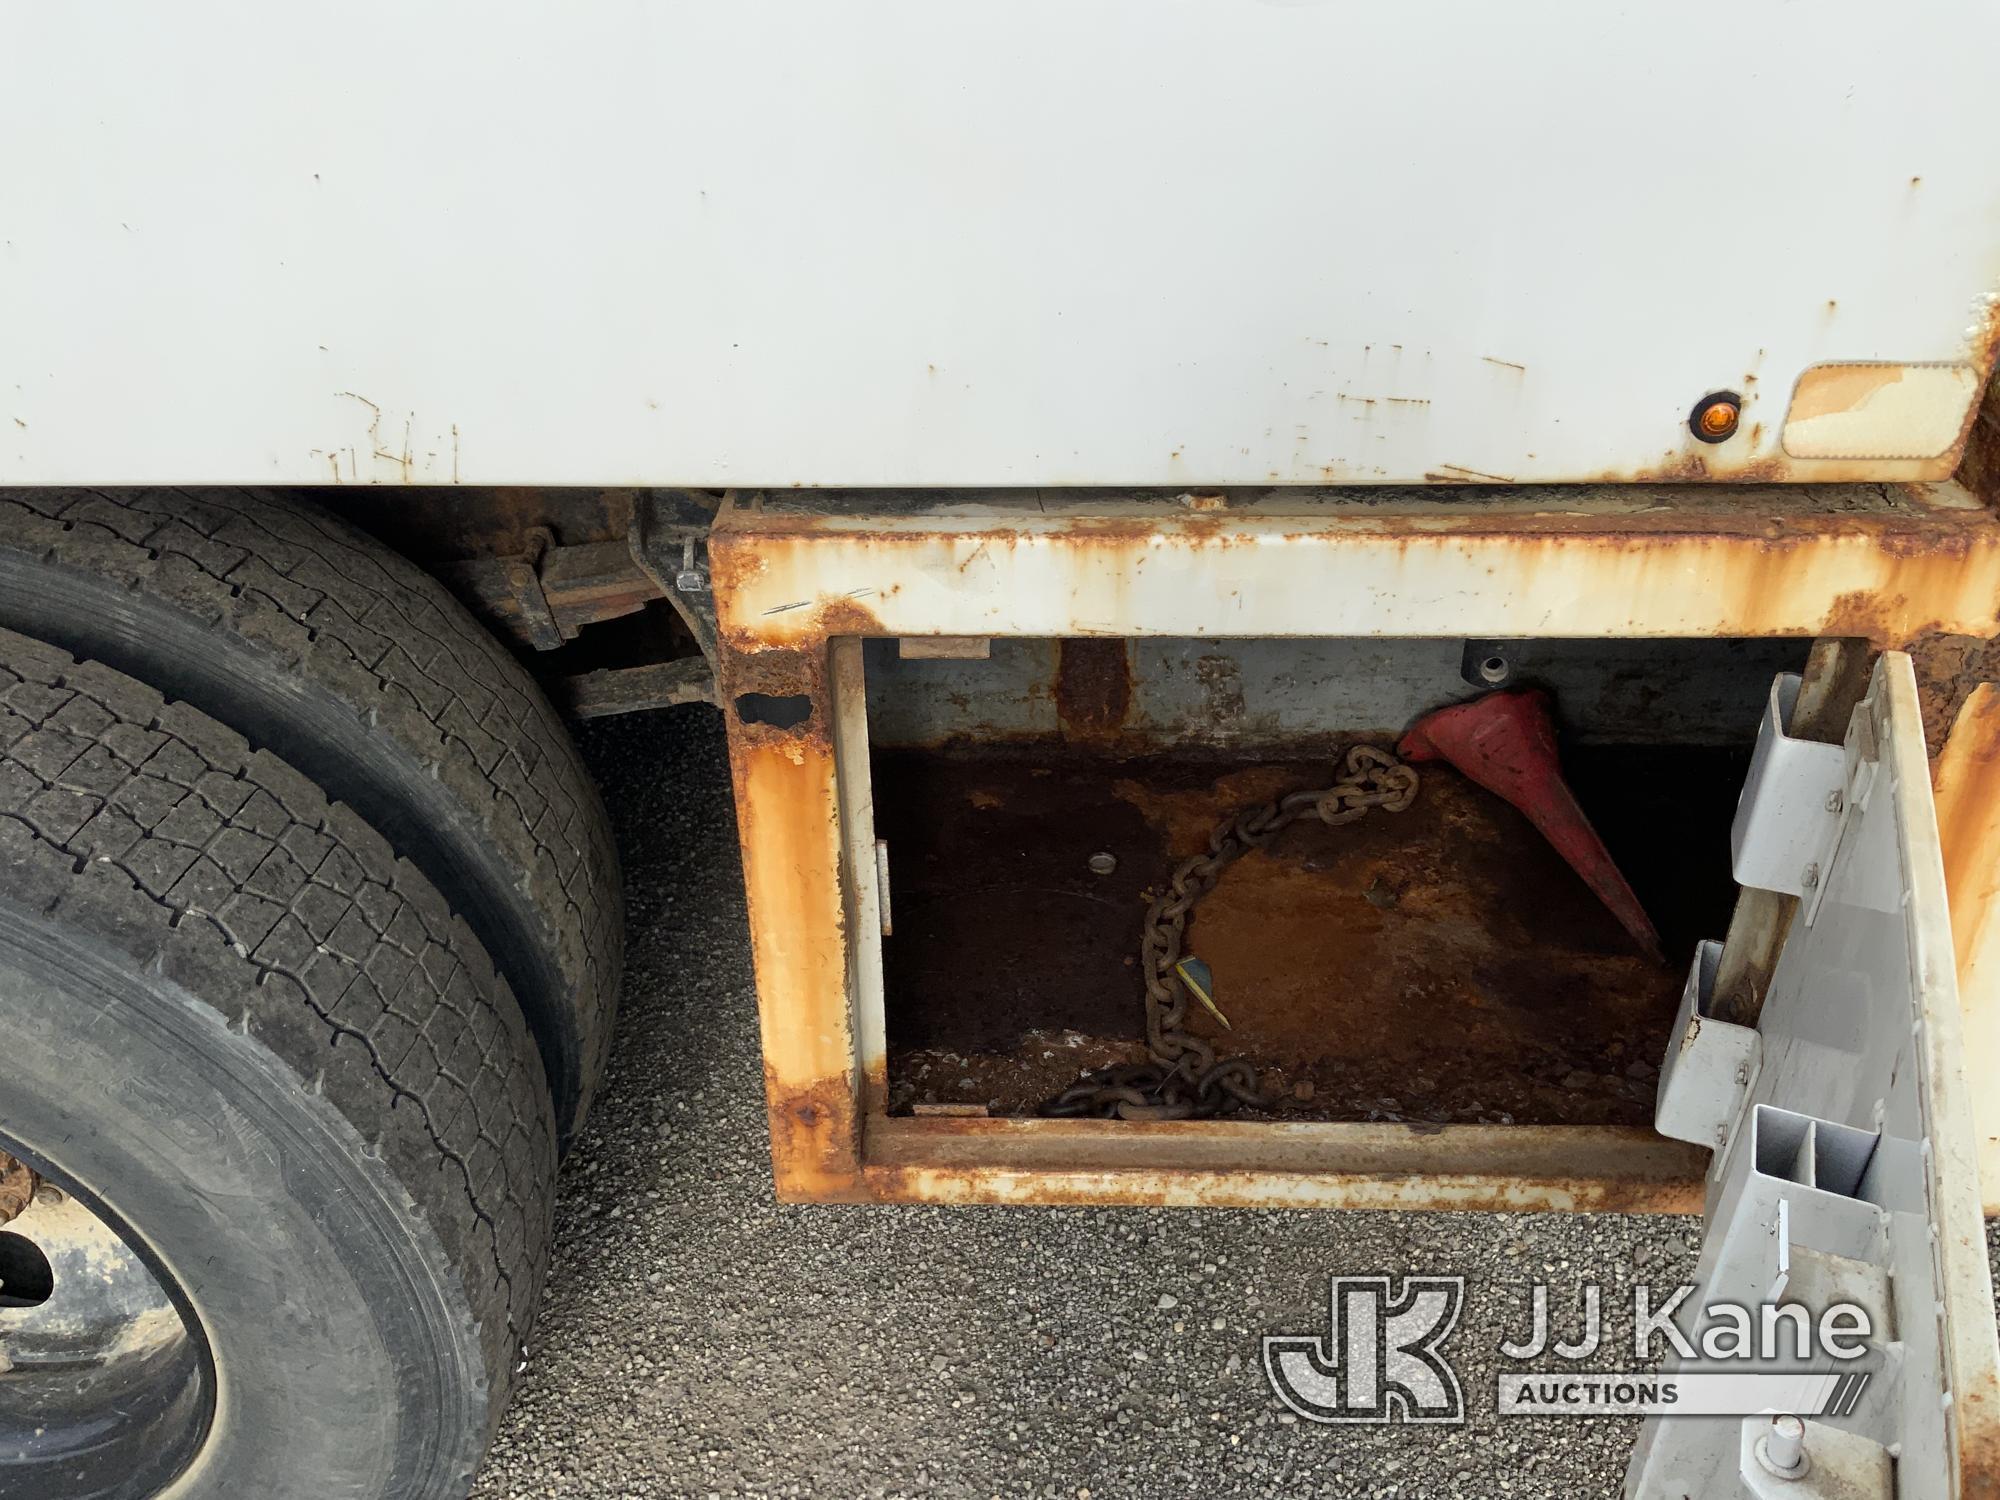 (Ashland, OH) 2012 Ford F750 Chipper Dump Truck Runs & Moves) (Seller States: Needs Brakes Replaced